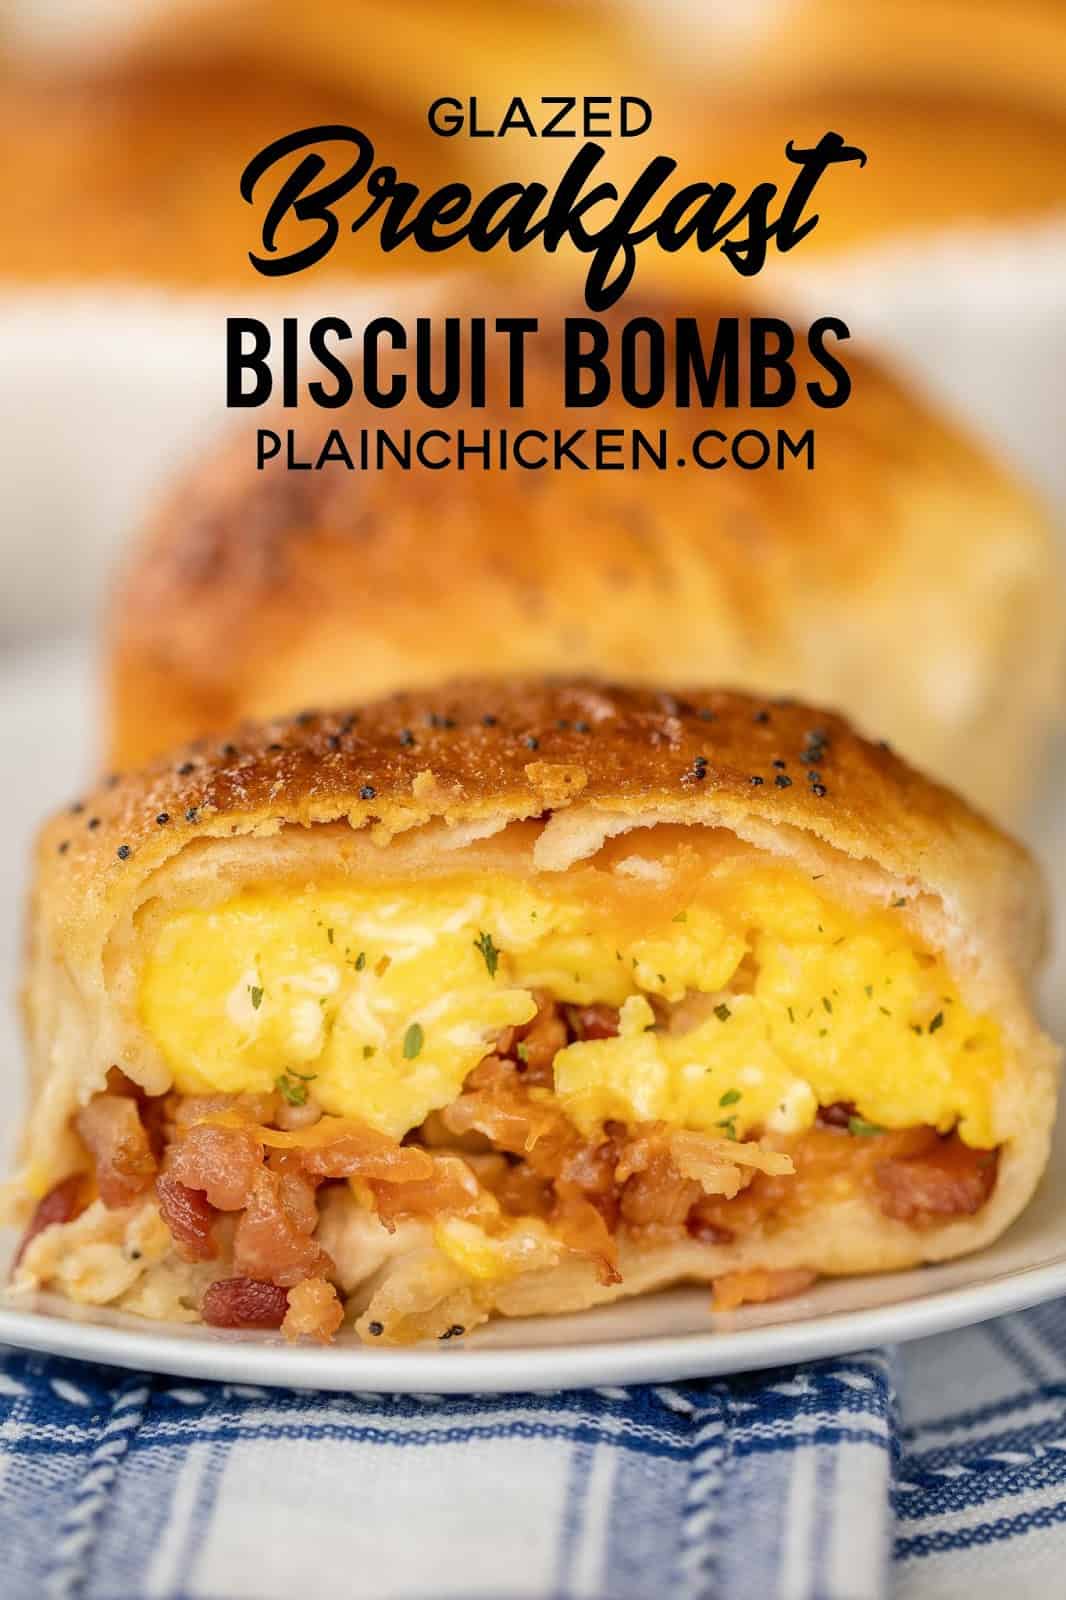 Glazed Breakfast Biscuit Bombs - the best way to start the day! Biscuits stuffed with scrambled eggs, bacon and cheese and topped with a sweet and savory glaze. We make these at least once a month! Refrigerated biscuits, milk, eggs, bacon, cheddar cheese, butter, brown sugar, dijon mustard, Worcestershire sauce and poppy seeds. A great dish for breakfast, brunch and overnight guests! #breakfast #biscuits